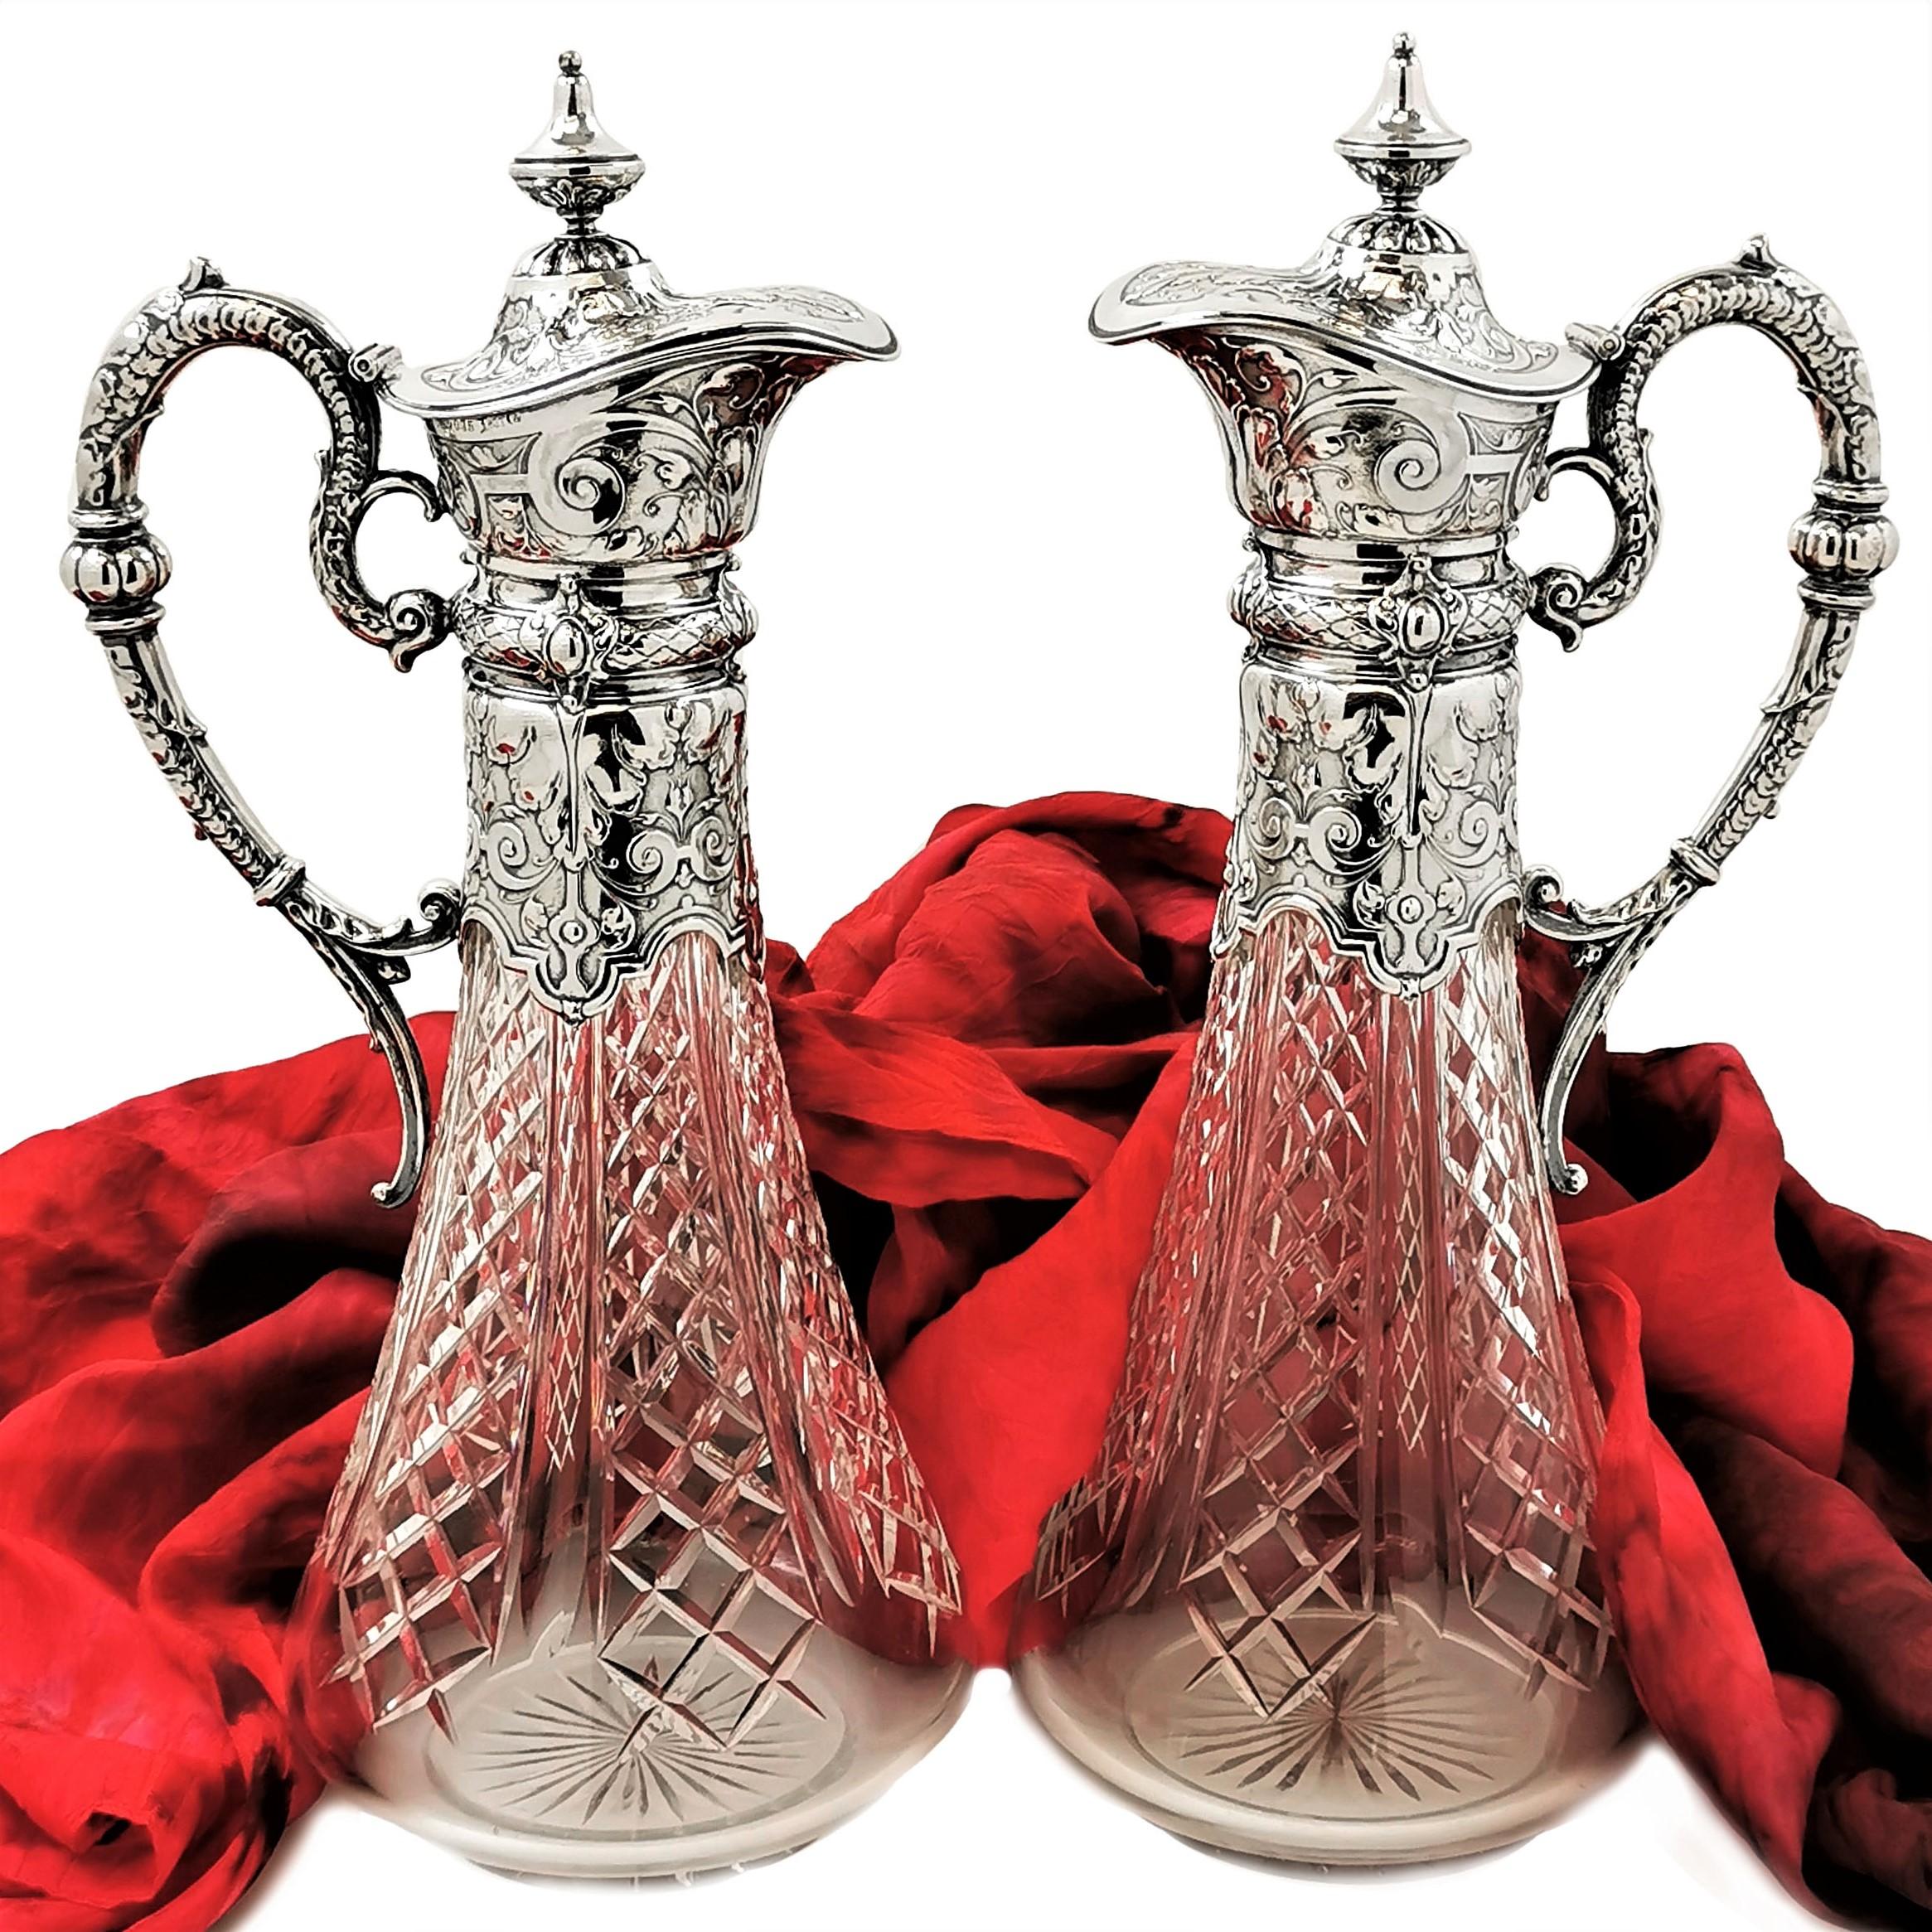 An elegant pair of Antique German Solid Silver & Glass Claret Jugs with solid silver mounted necks, lids and handles on cut glass bodies. The silver necks and lids of the Jugs are decorated with ornate chased patterns and the design on the handle